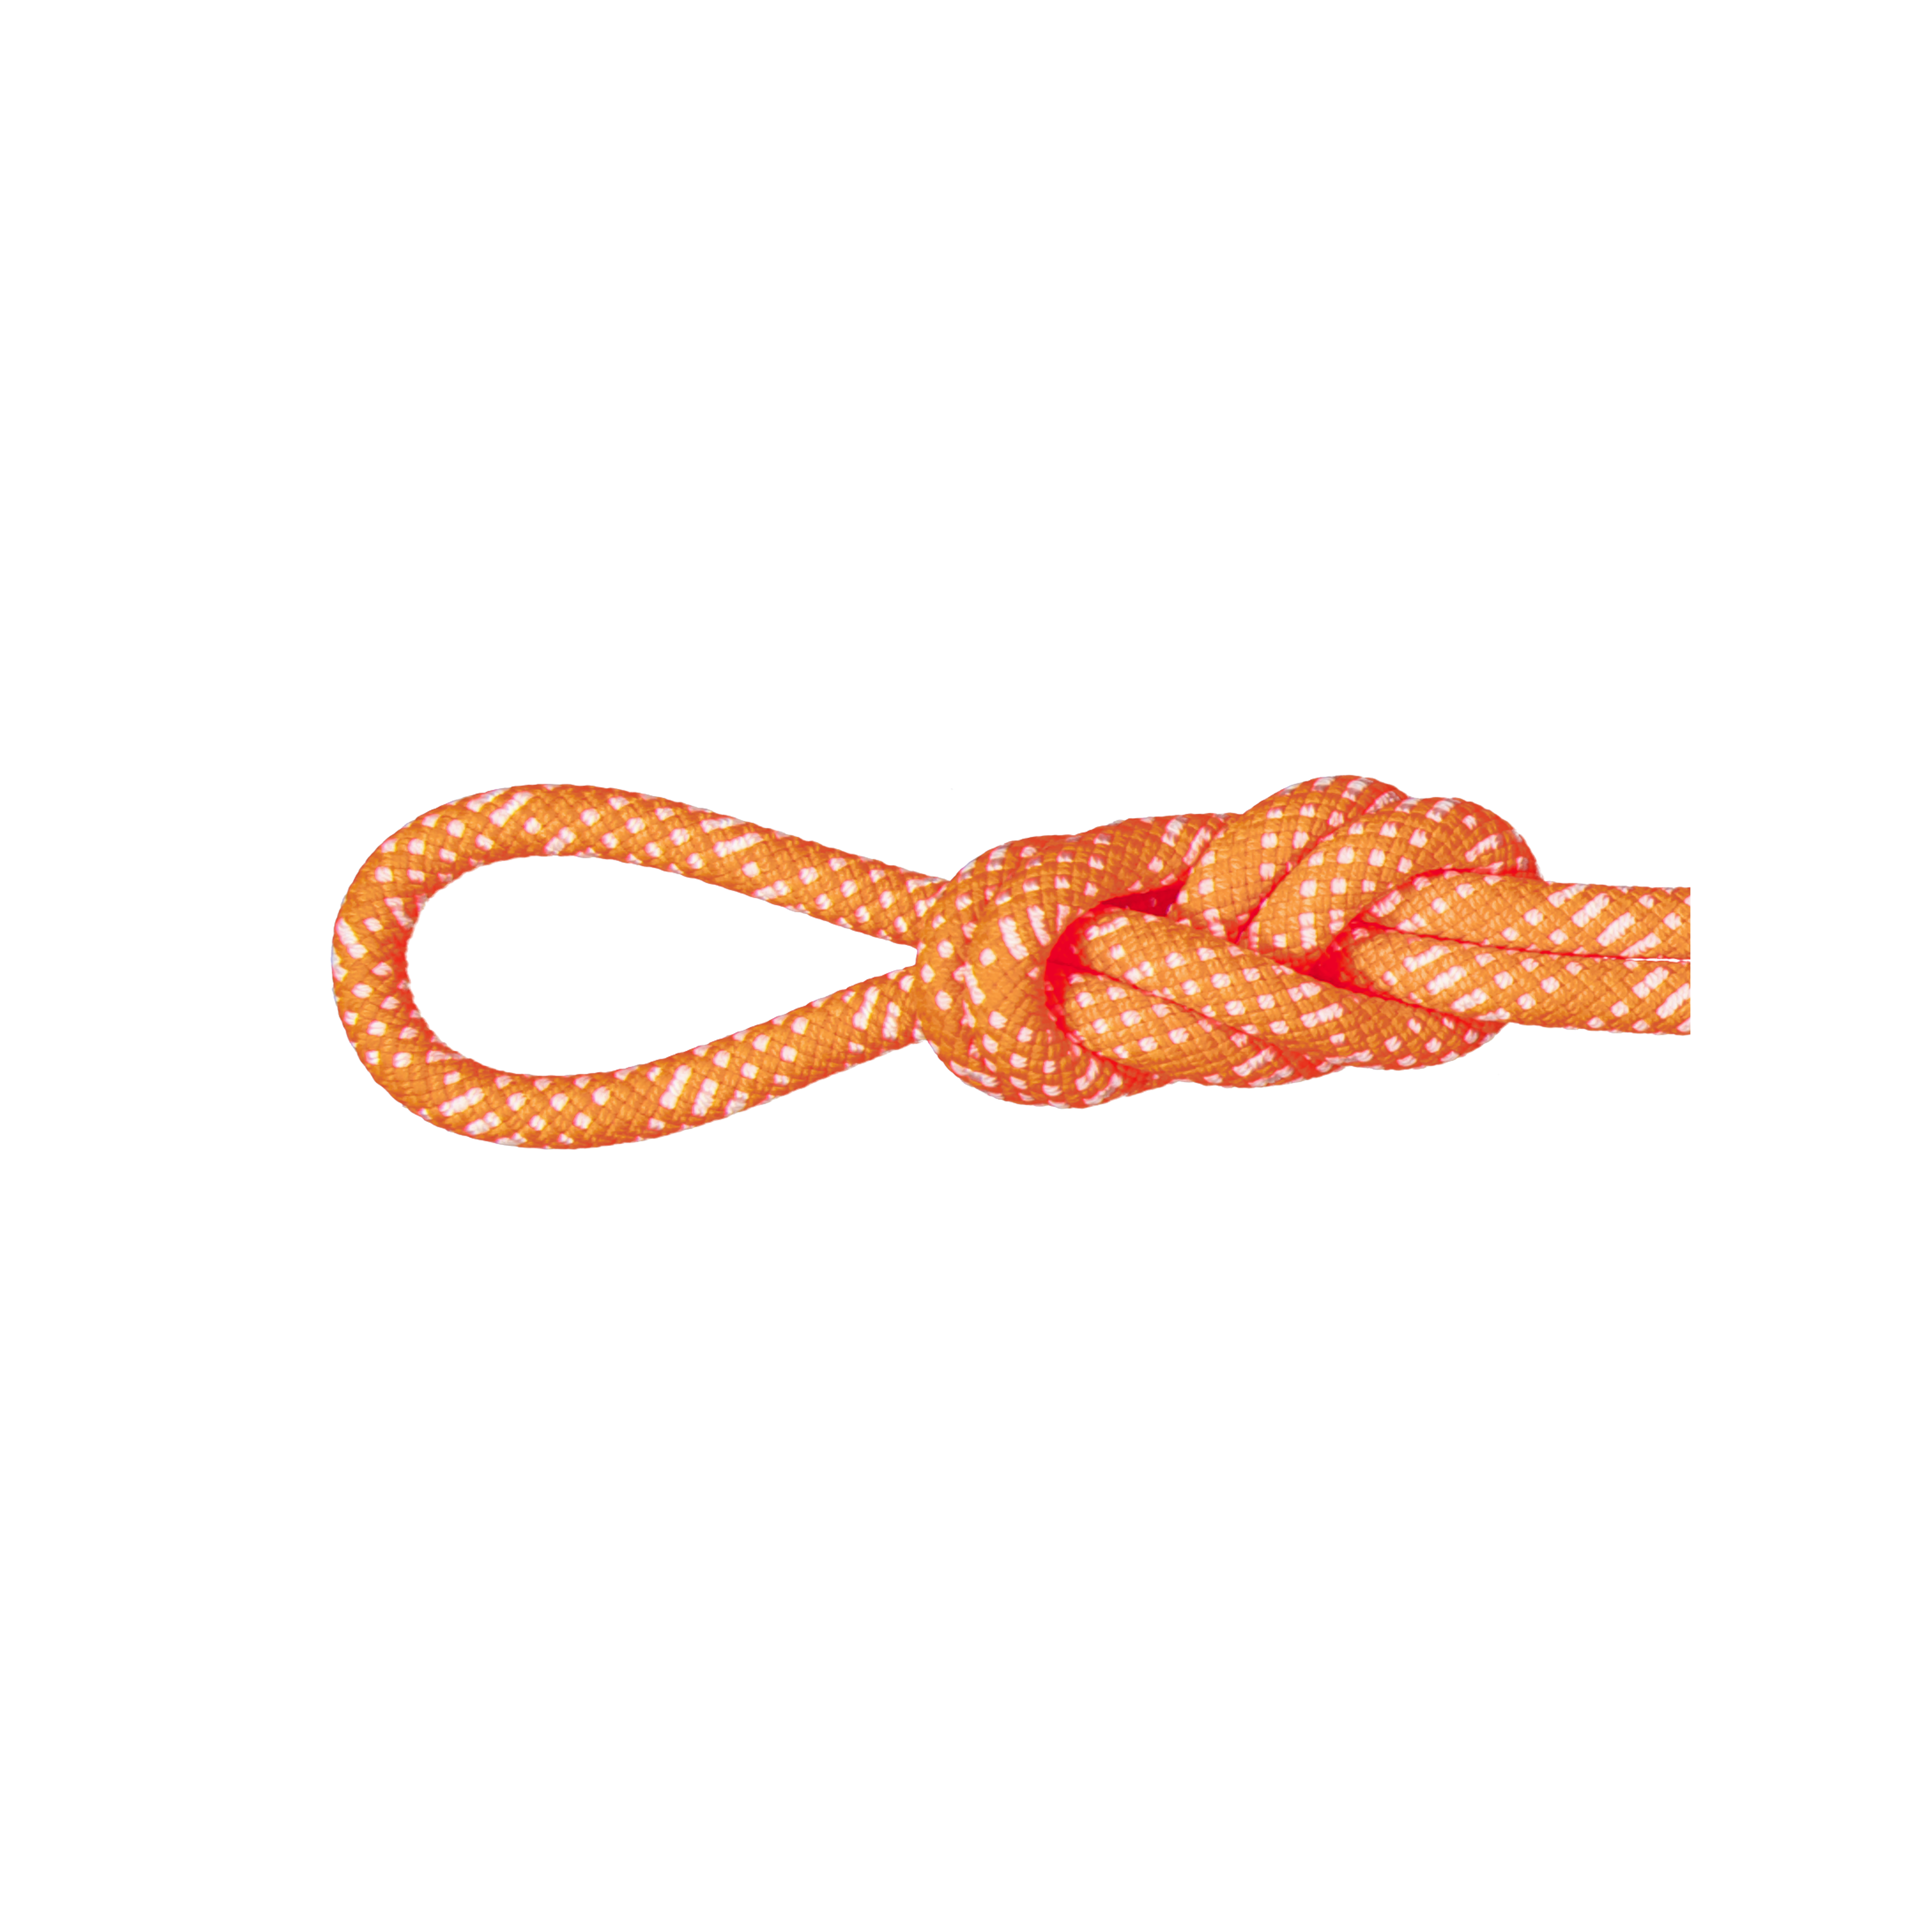 10.1 Gym Station Classic Rope product image